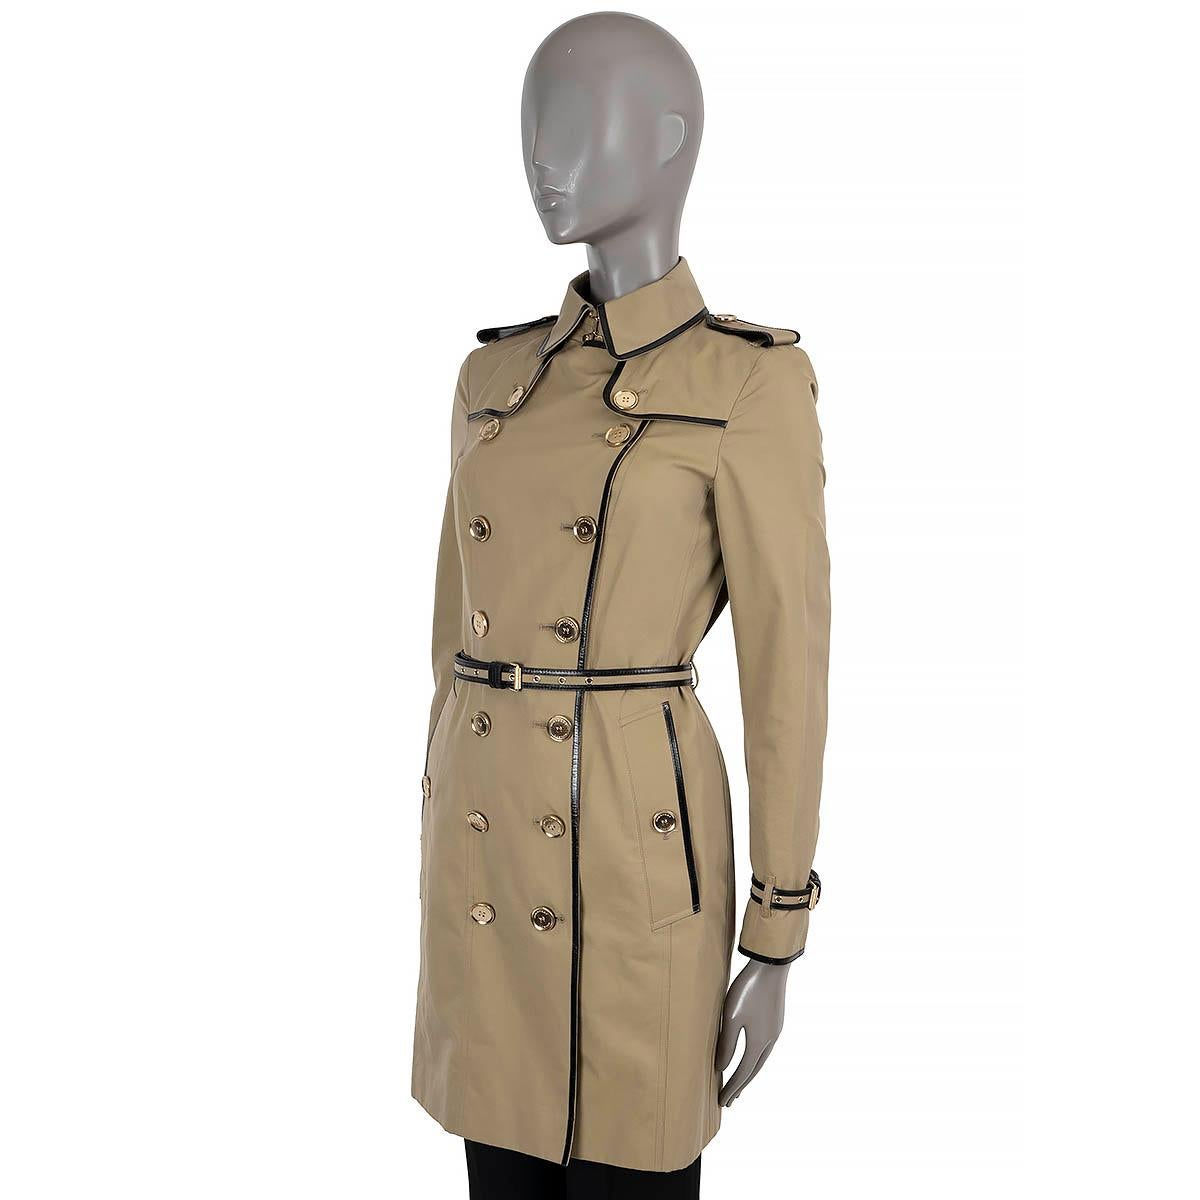 100% authentic Burberry London trench coat in beige cotton (100%). Features black patent leather trim, epaulettes, storm flaps at the chest and back, buttoned pockets at the waist and striped patent leather belts at the cuffs and waist. Closes with